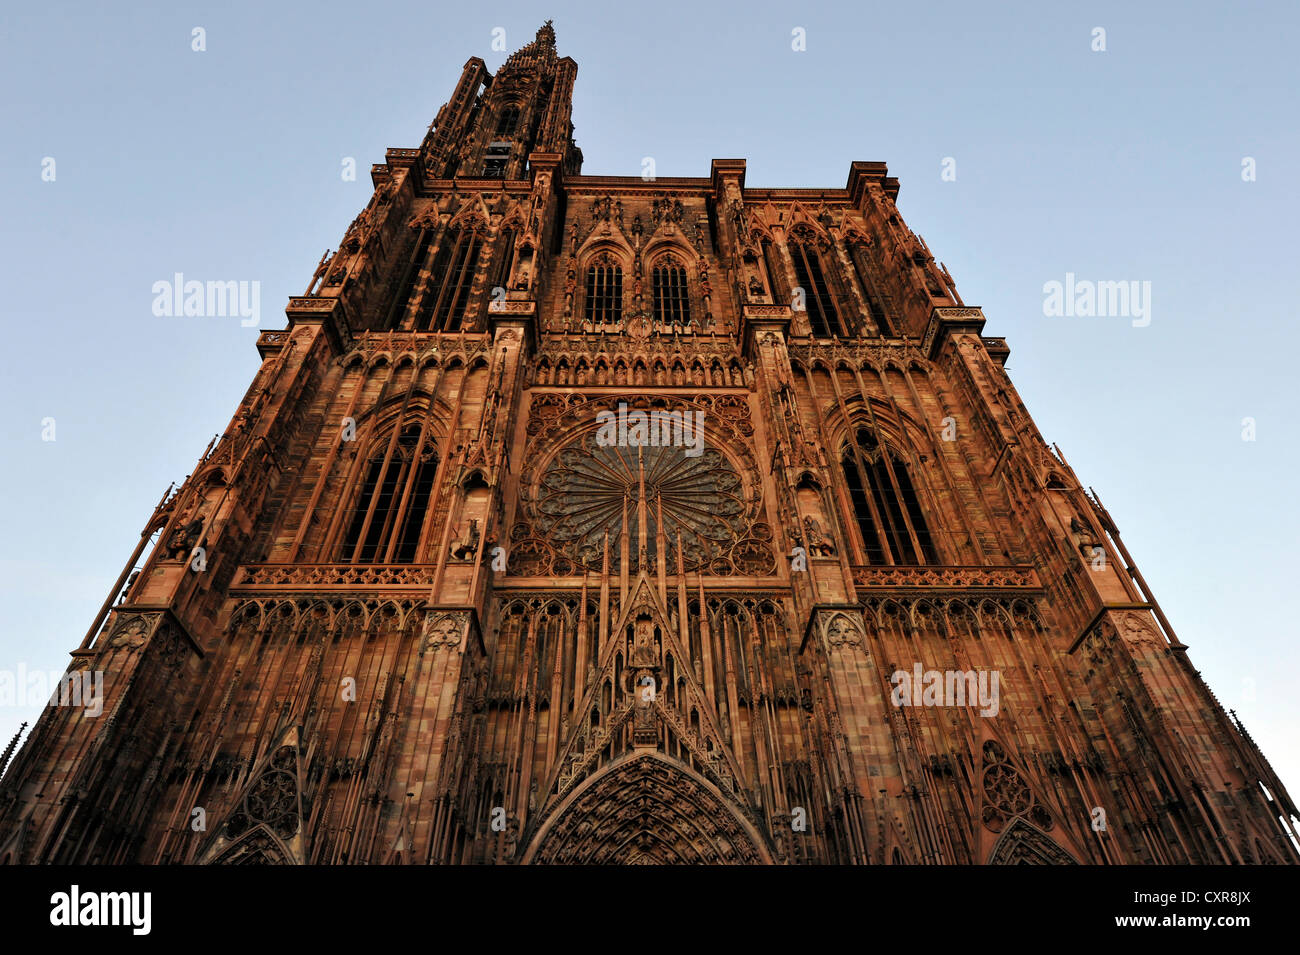 Strasbourg Cathedral, Cathedral of Our Lady of Strasbourg, Strasbourg, Bas-Rhin département, Alsace, France, Europe Stock Photo